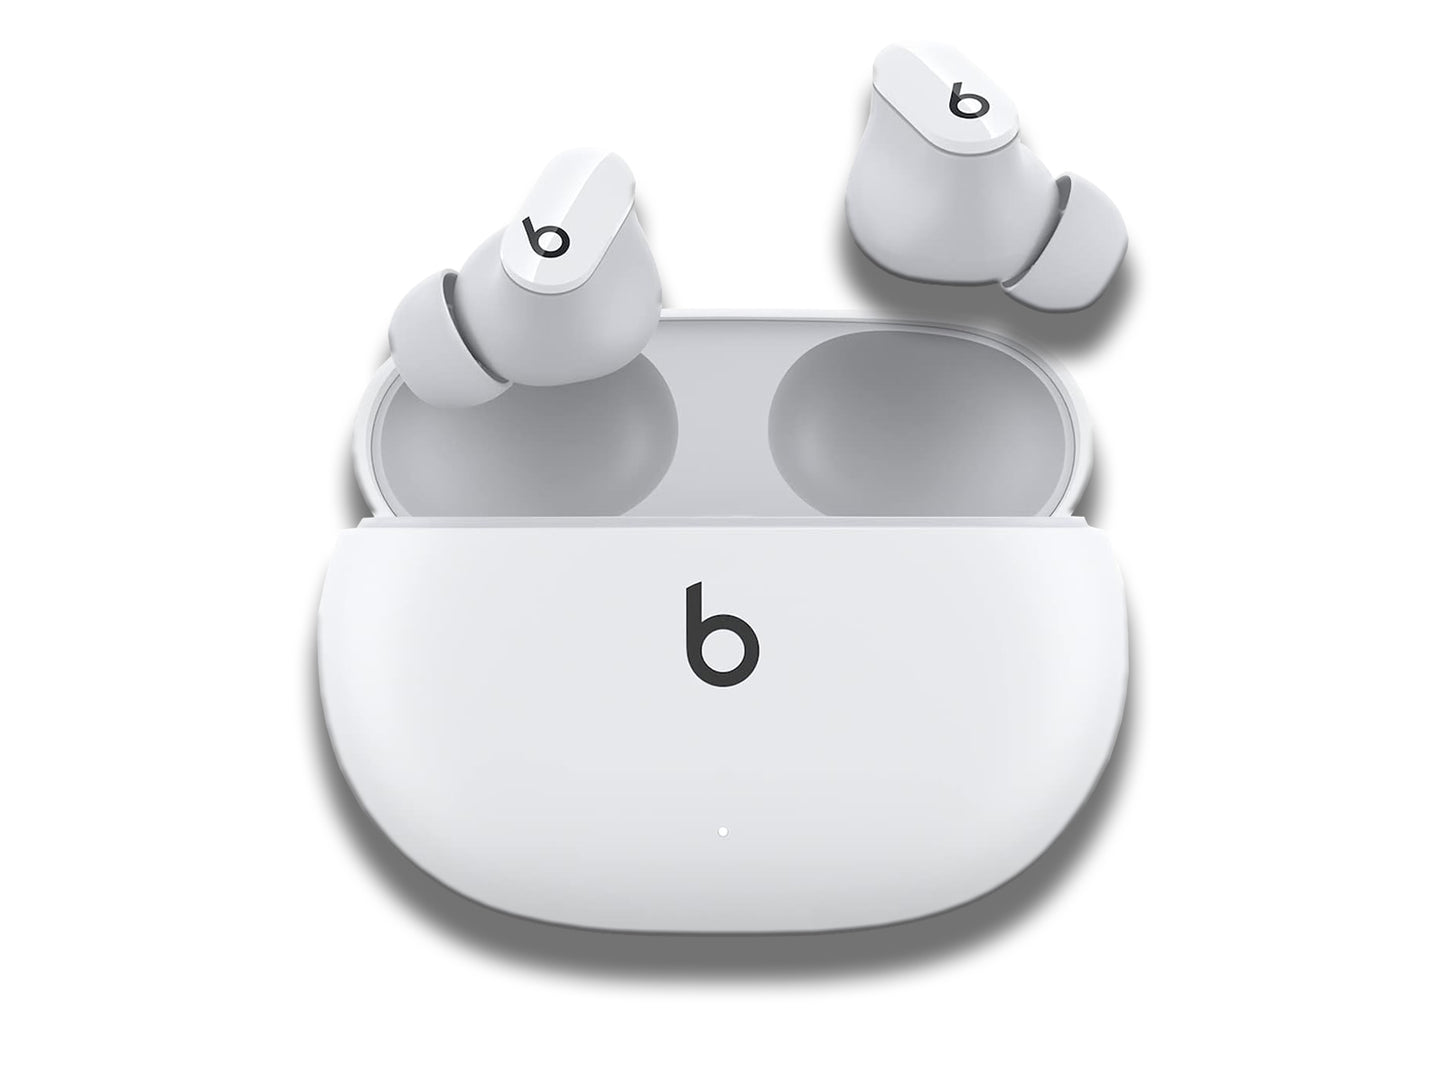 Beats Studio Buds Noise Cancelling Earphones In White Buds Above Case